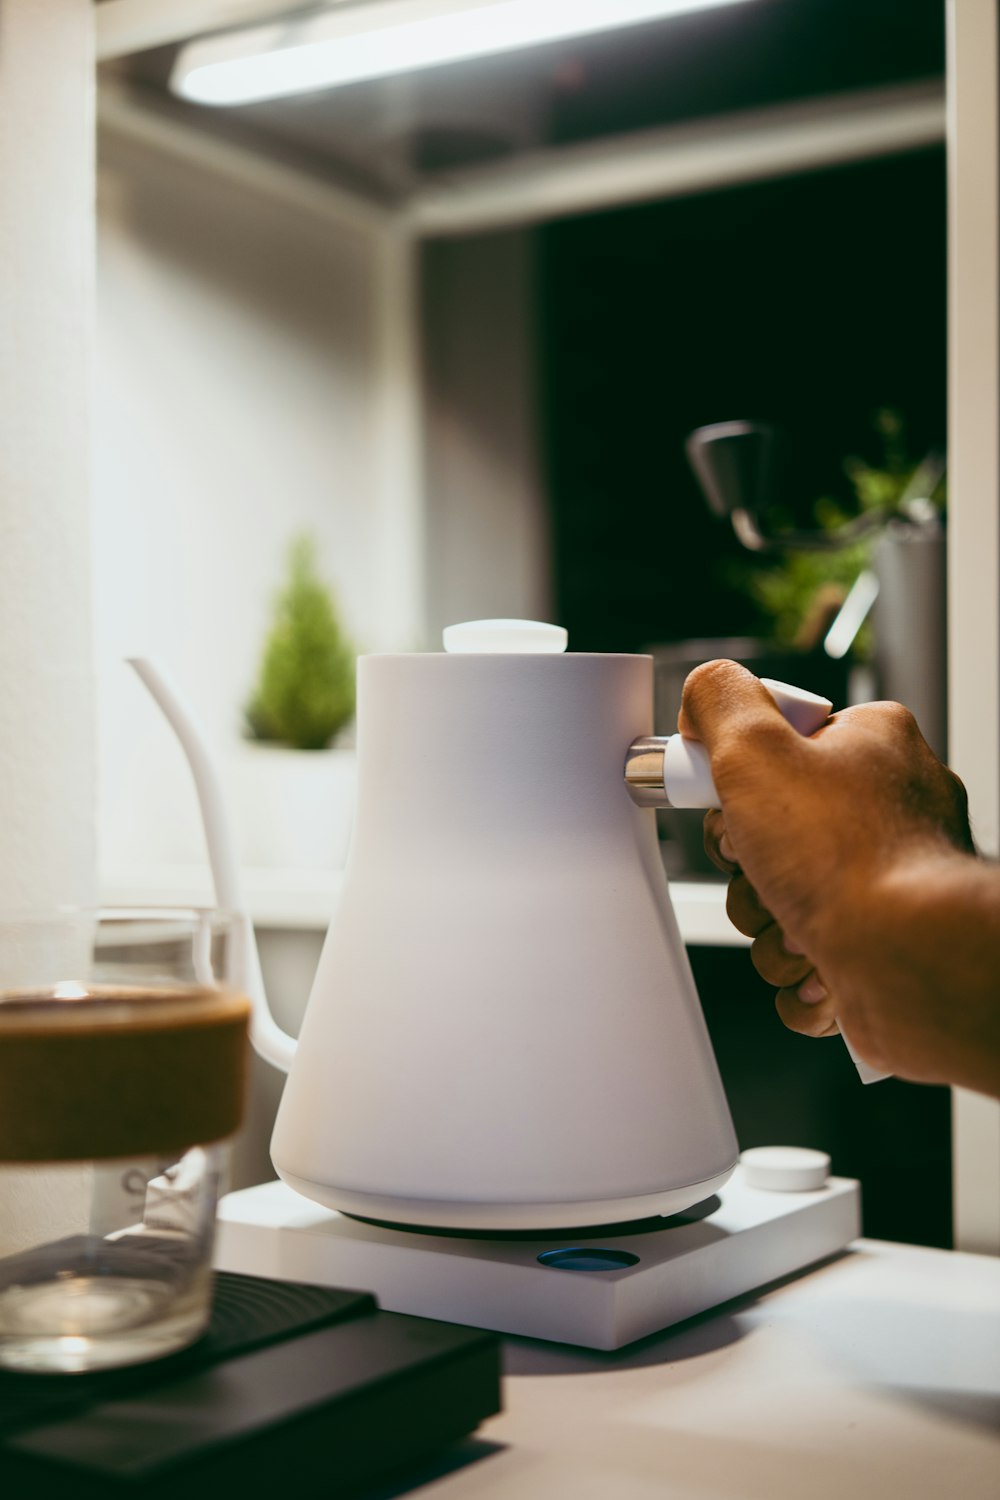 a person is holding a coffee pot on a table